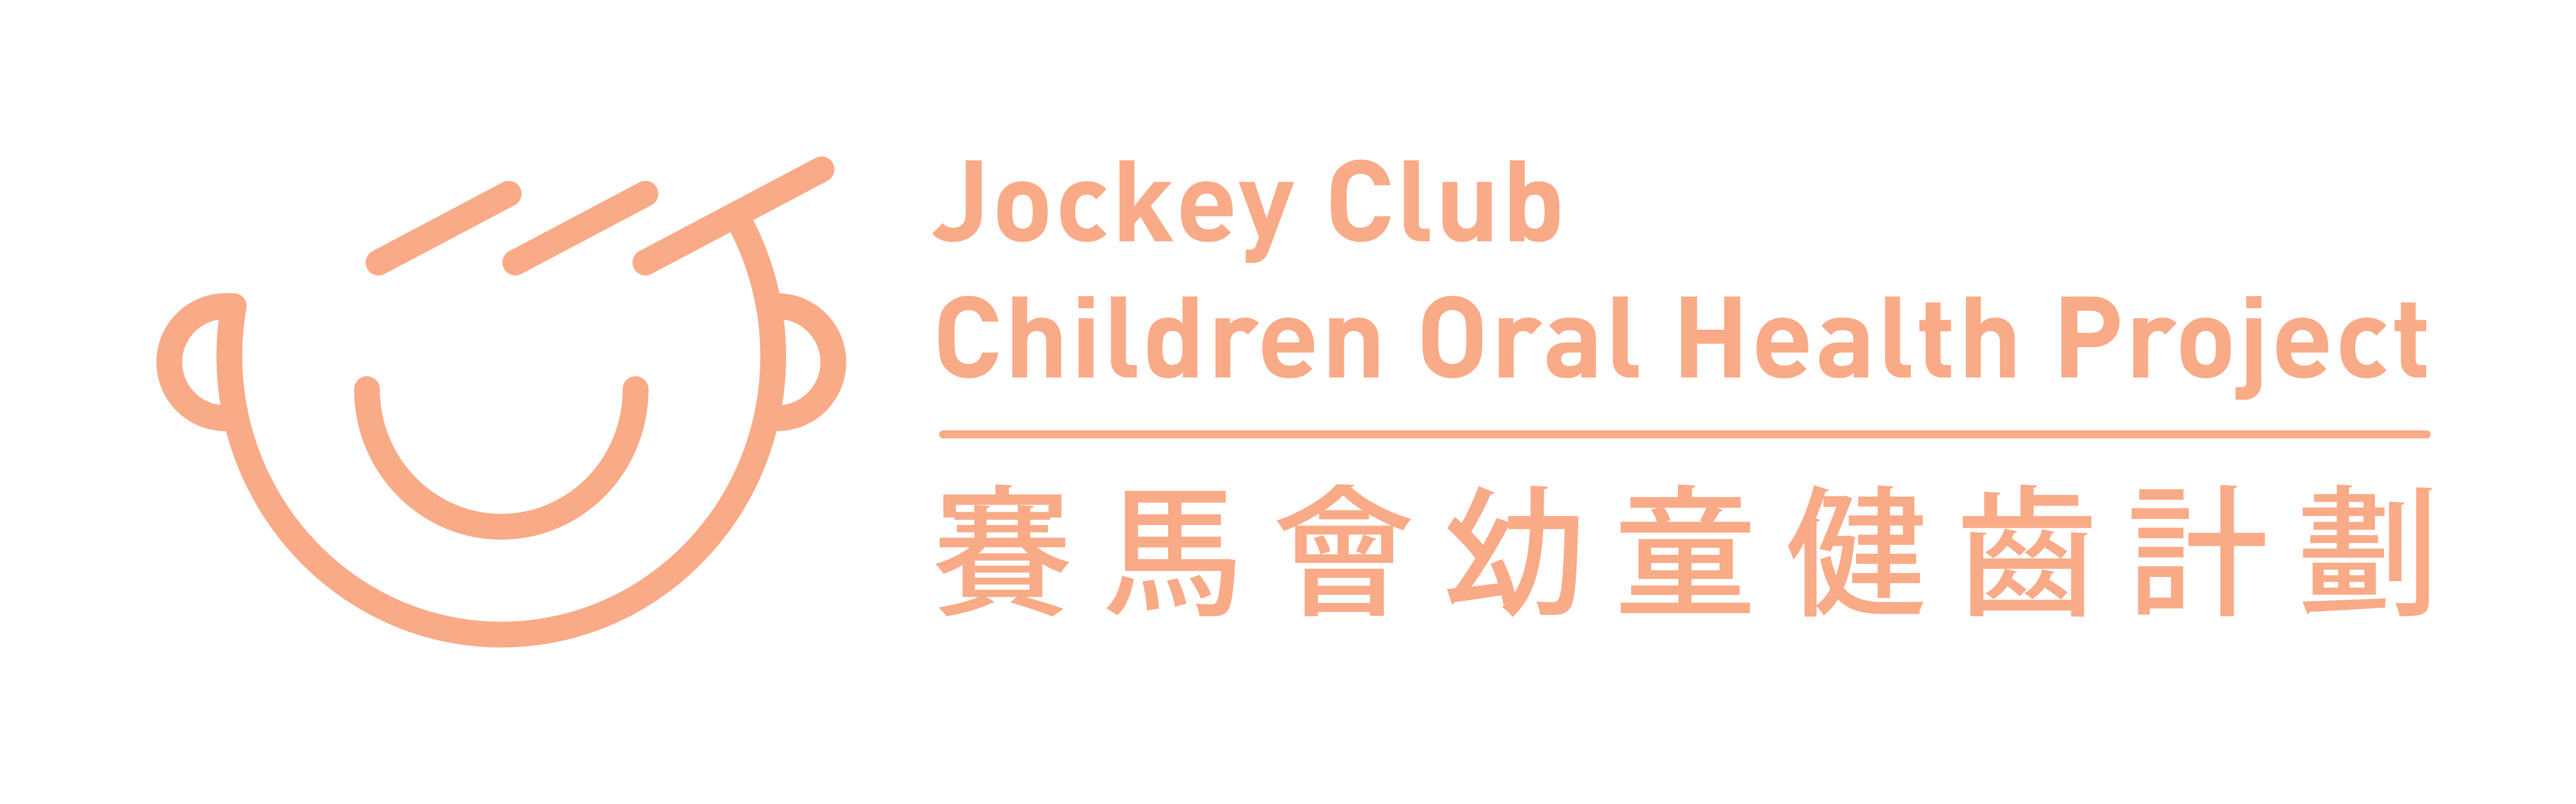 Jockey Club Children Oral Health Project Press Conference banner